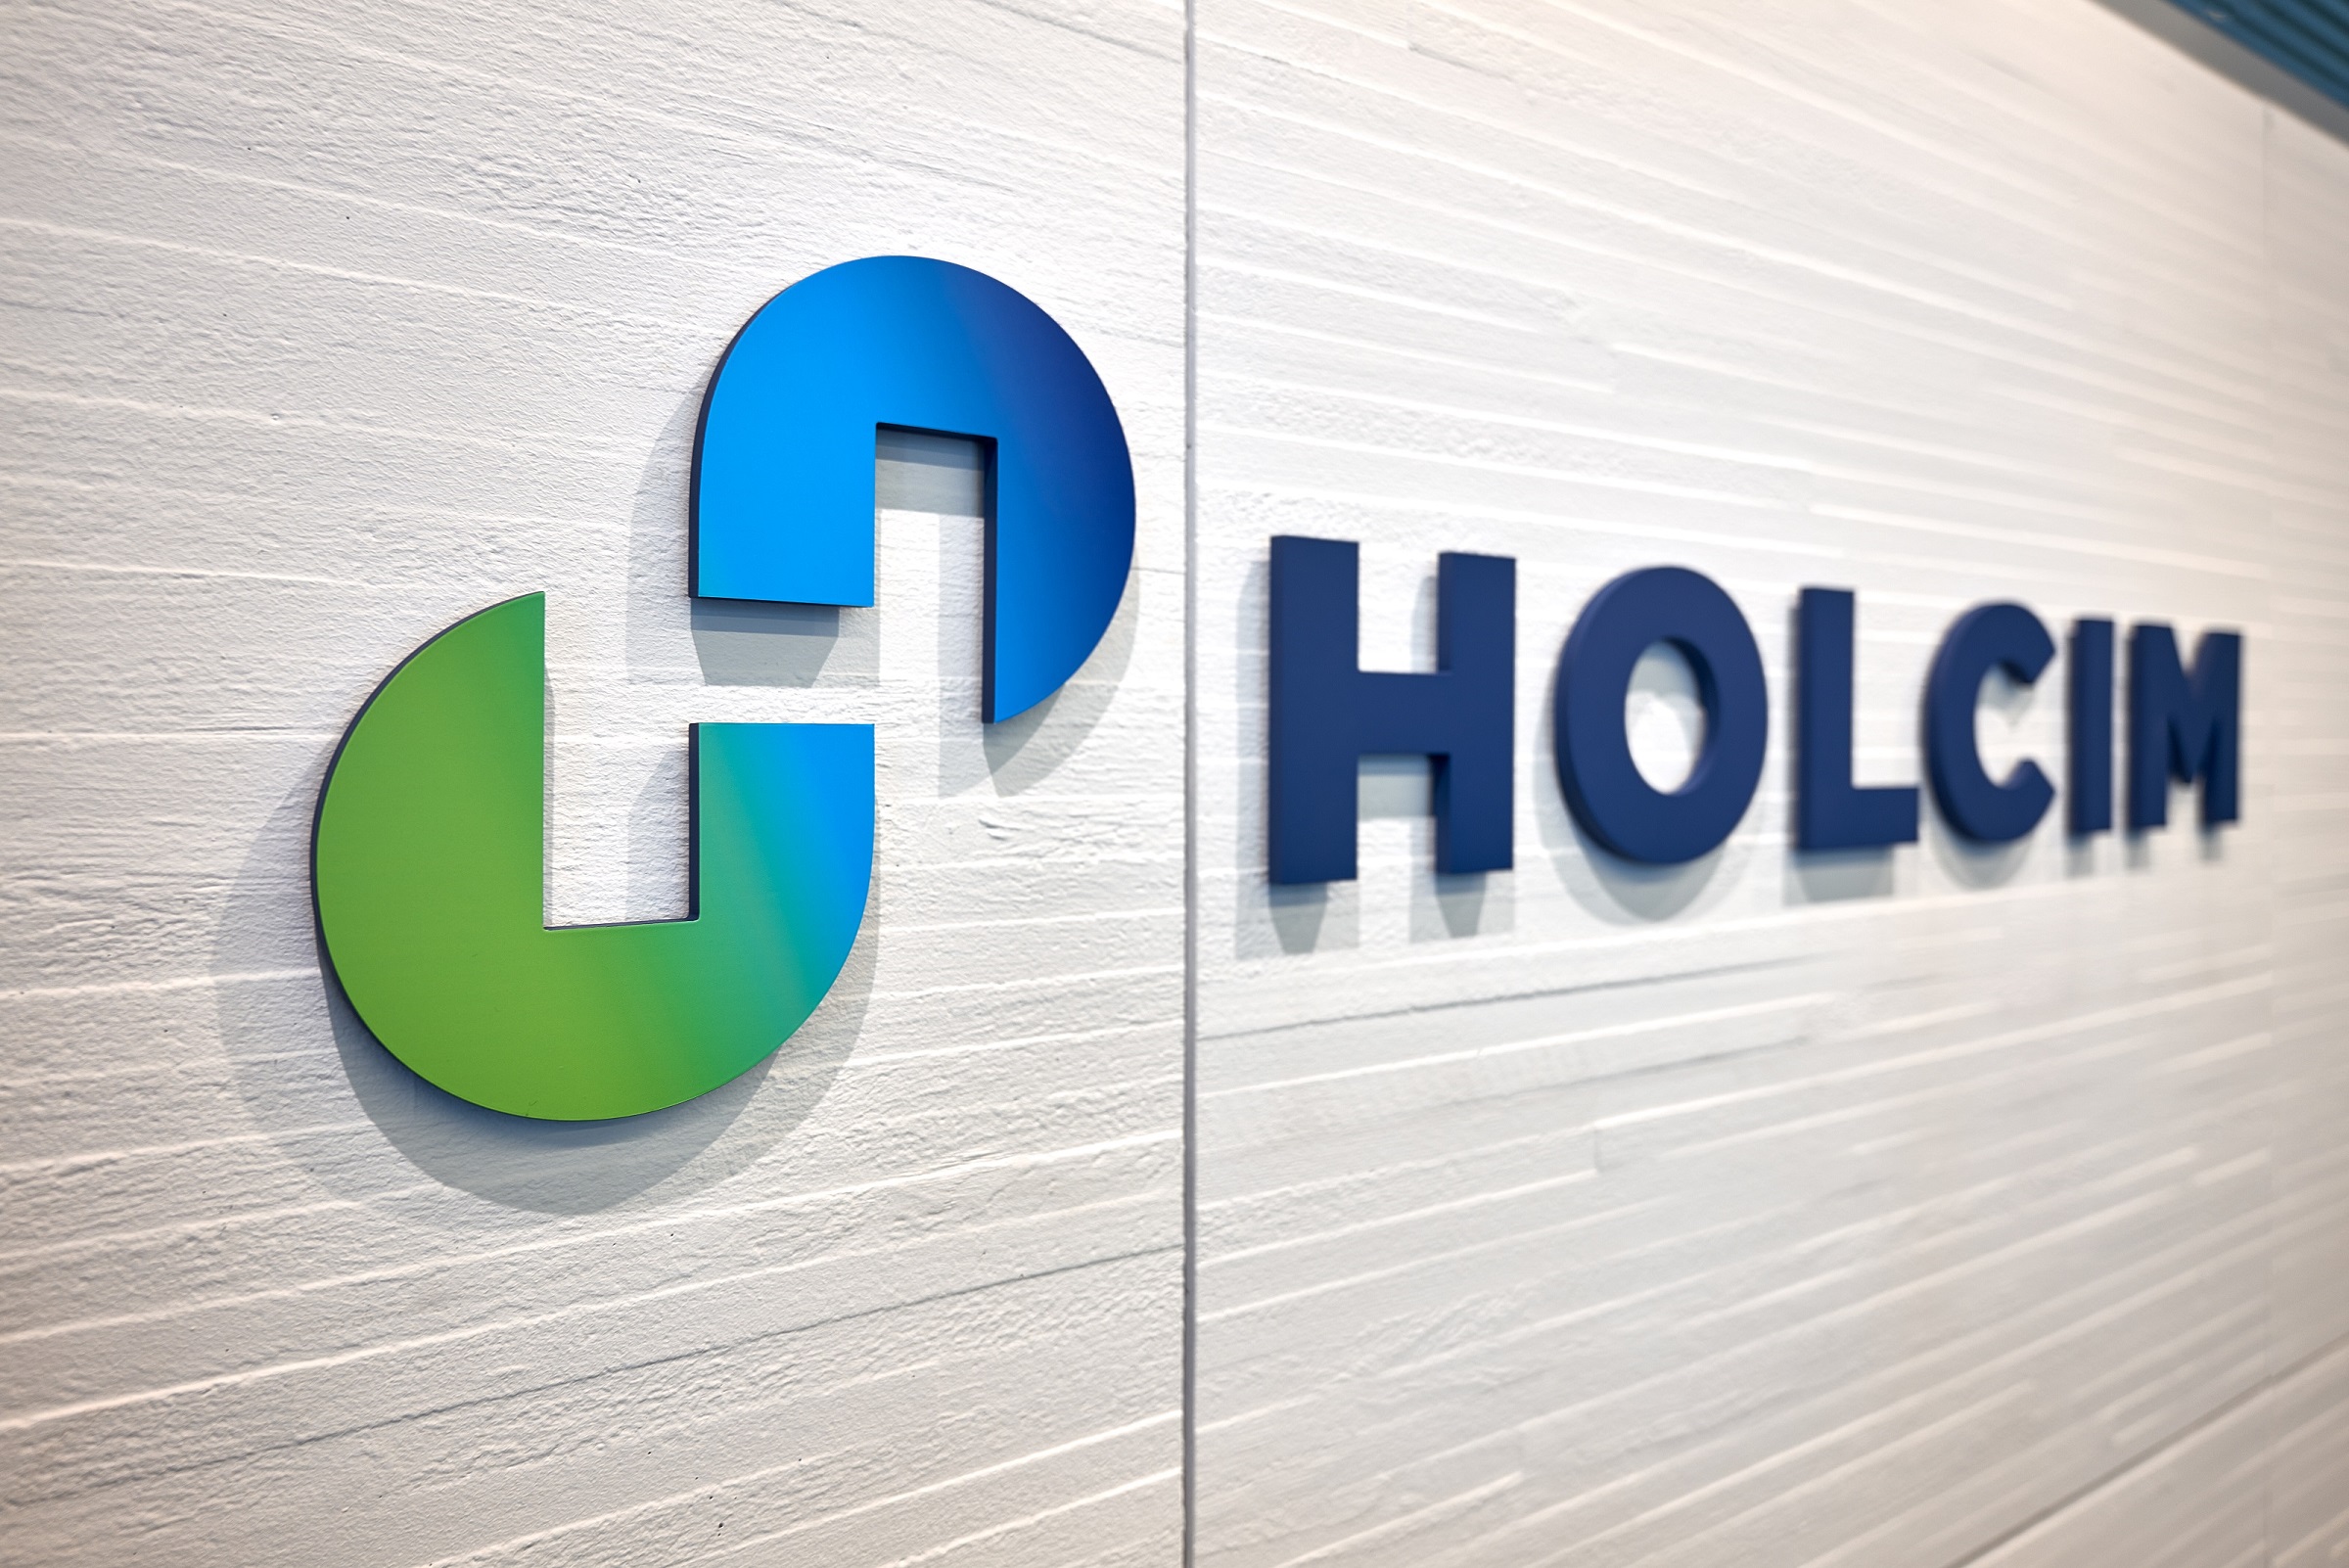 Holcim says the Circular Explorer initiative aims to help the Philippines move towards a circular ‘reduce-reuse-recycle’ economy